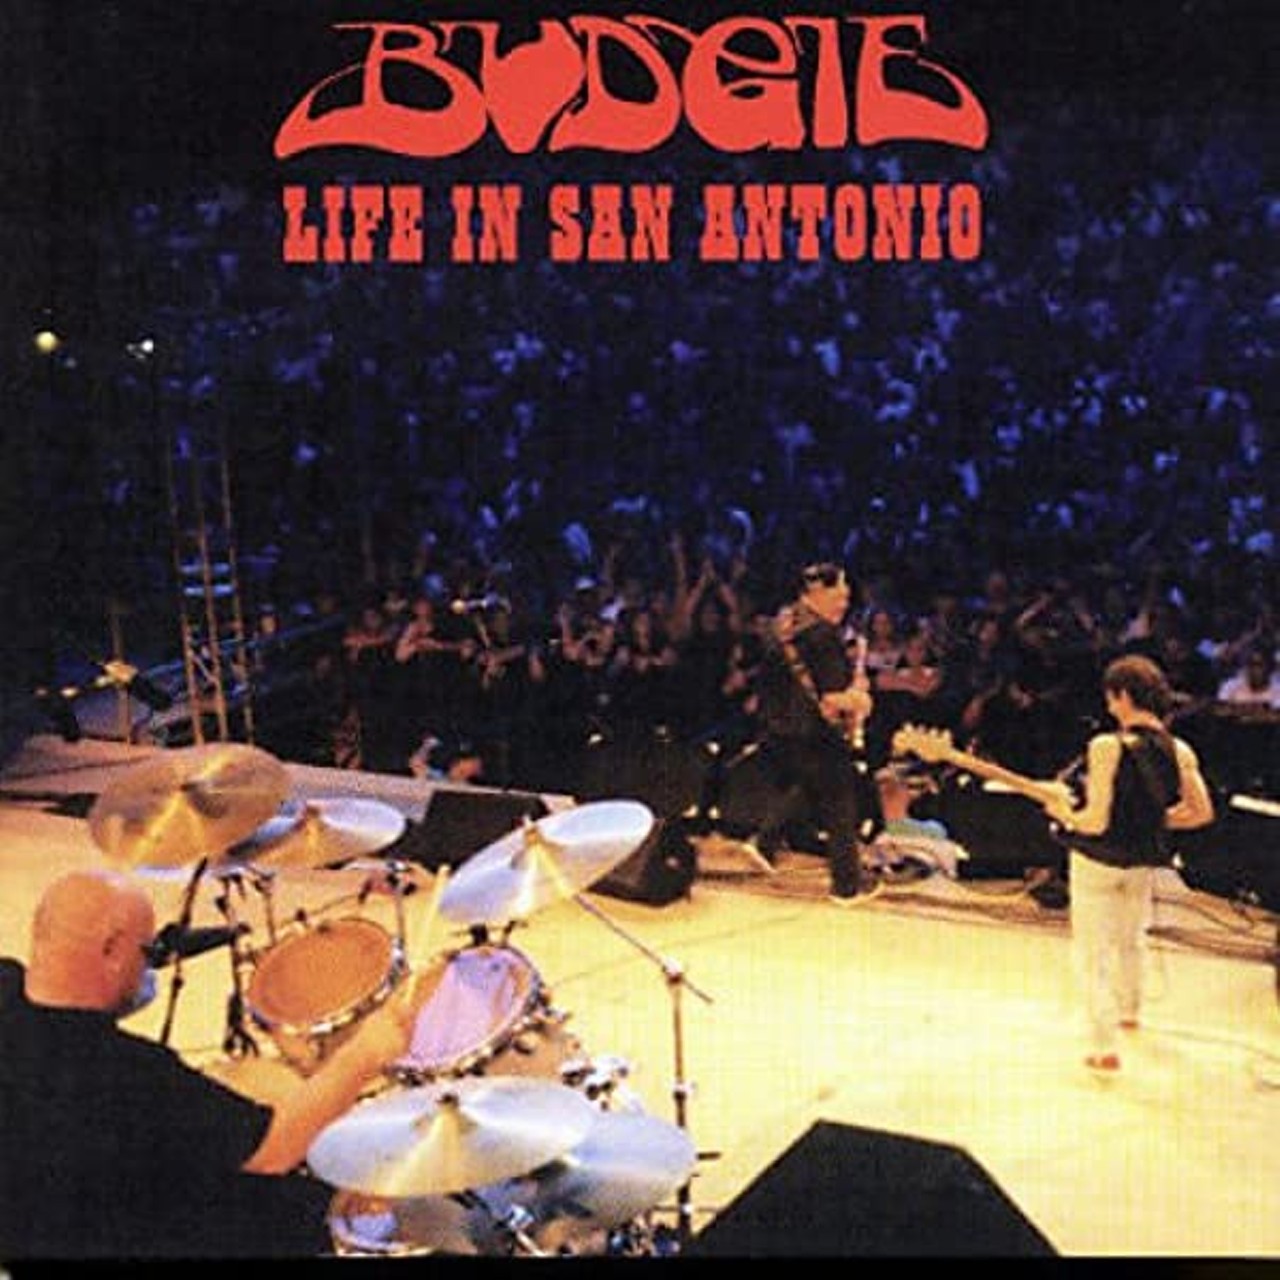 Budgie: "Life in San Antonio"
Even if they were a cult phenomenon pretty much everywhere else, proto-metal act Budgie were huge in San Antonio thanks to regular airplay on the old KISS-FM. That explains why the reunited band recorded this riff-ripping set at Sunken Garden Theater for a 2002 live album.
Photo via RCA